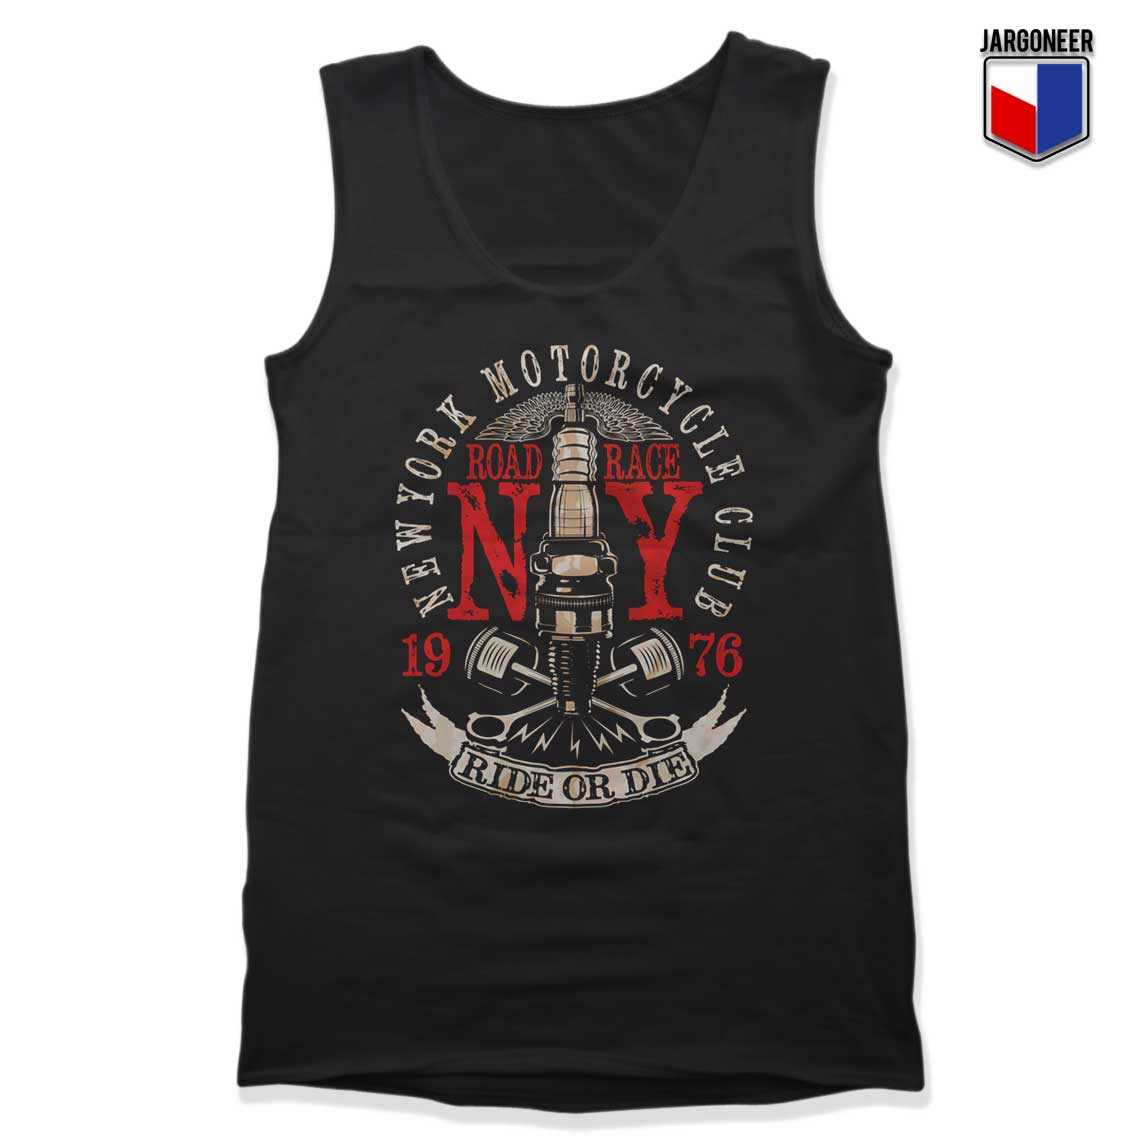 New York Motorcycle Club 1976 Tank Top - Shop Unique Graphic Cool Shirt Designs